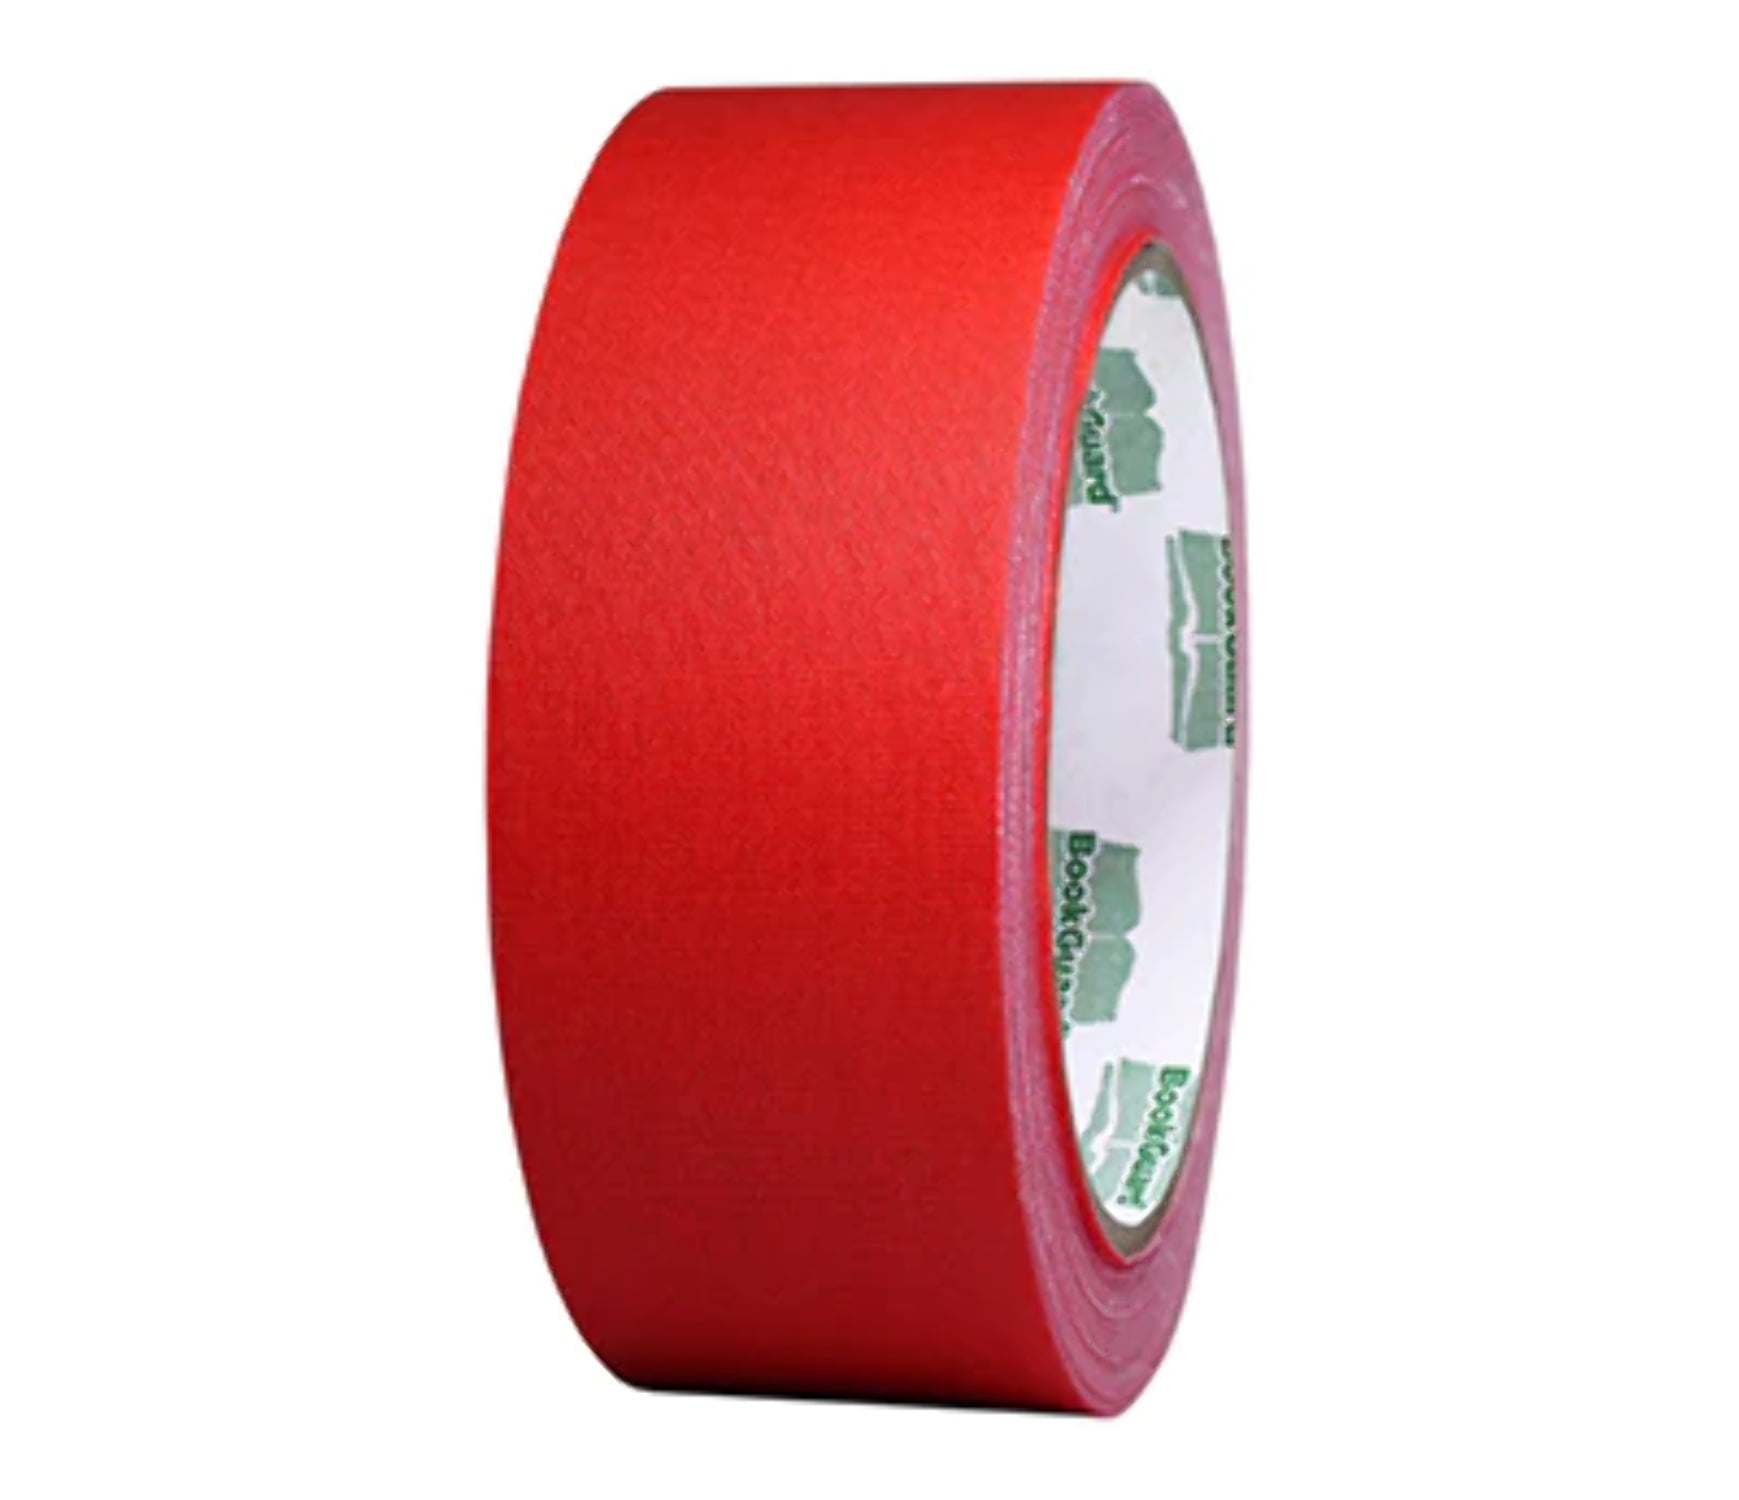 BookGuard 1-1/2 Inch Vinyl-Coated Cotton Cloth Book Binding Repair Tape, 15  Yard Roll, Forest Green